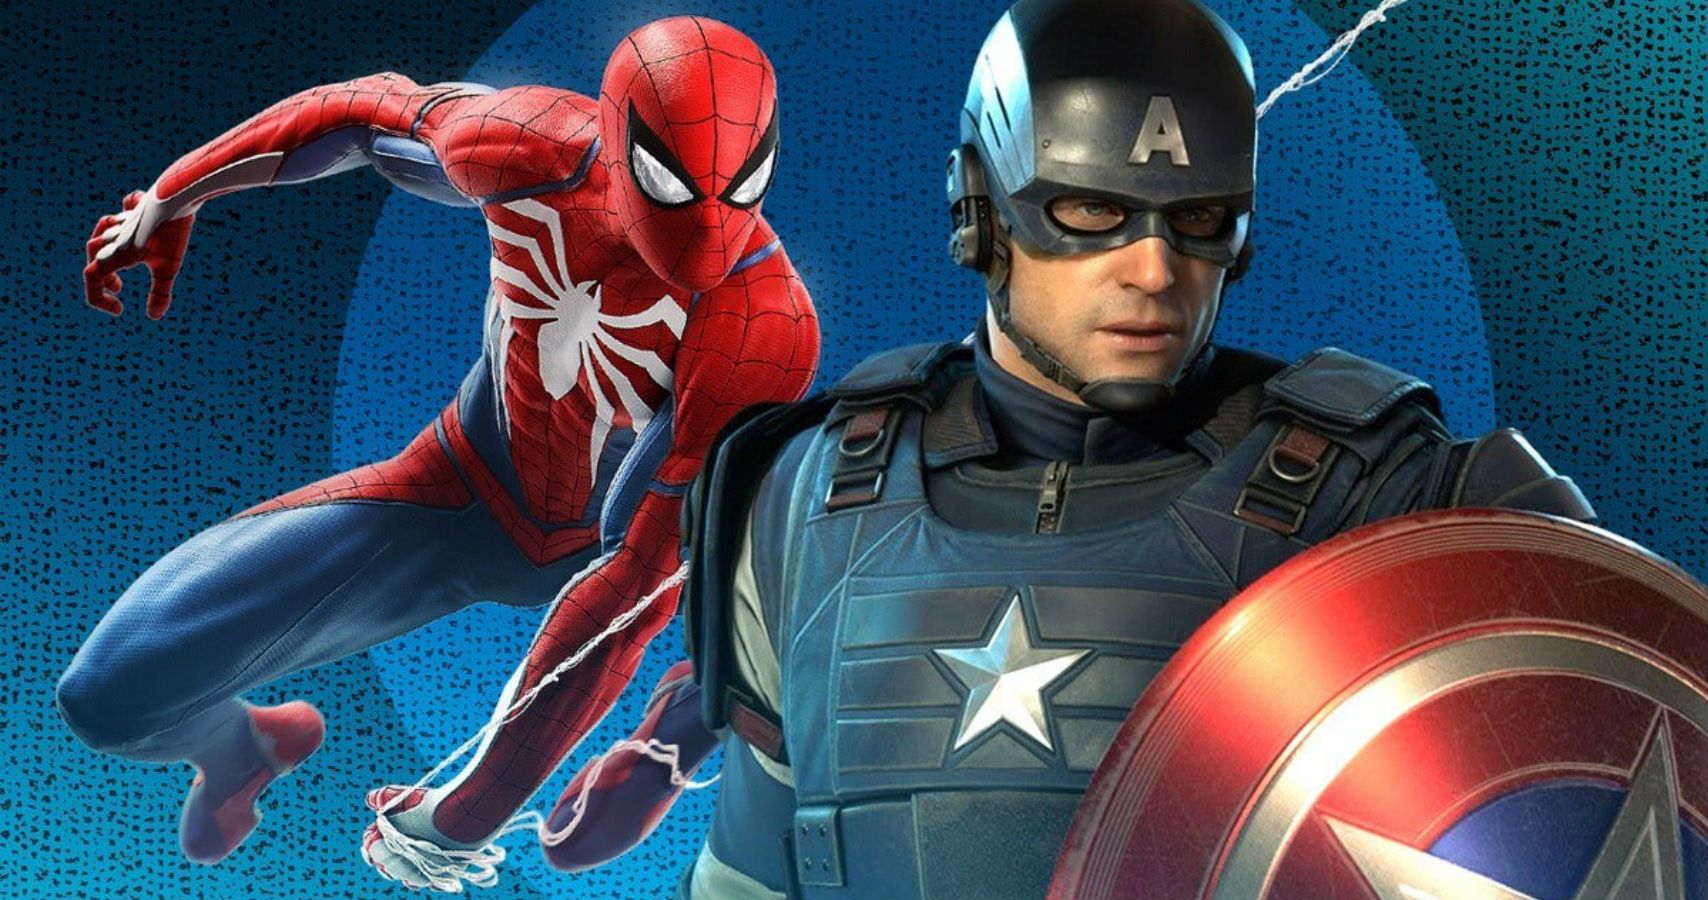 Avengers Dev Tells Xbox Players Who Want To Play As SpiderMan To Get A PlayStation